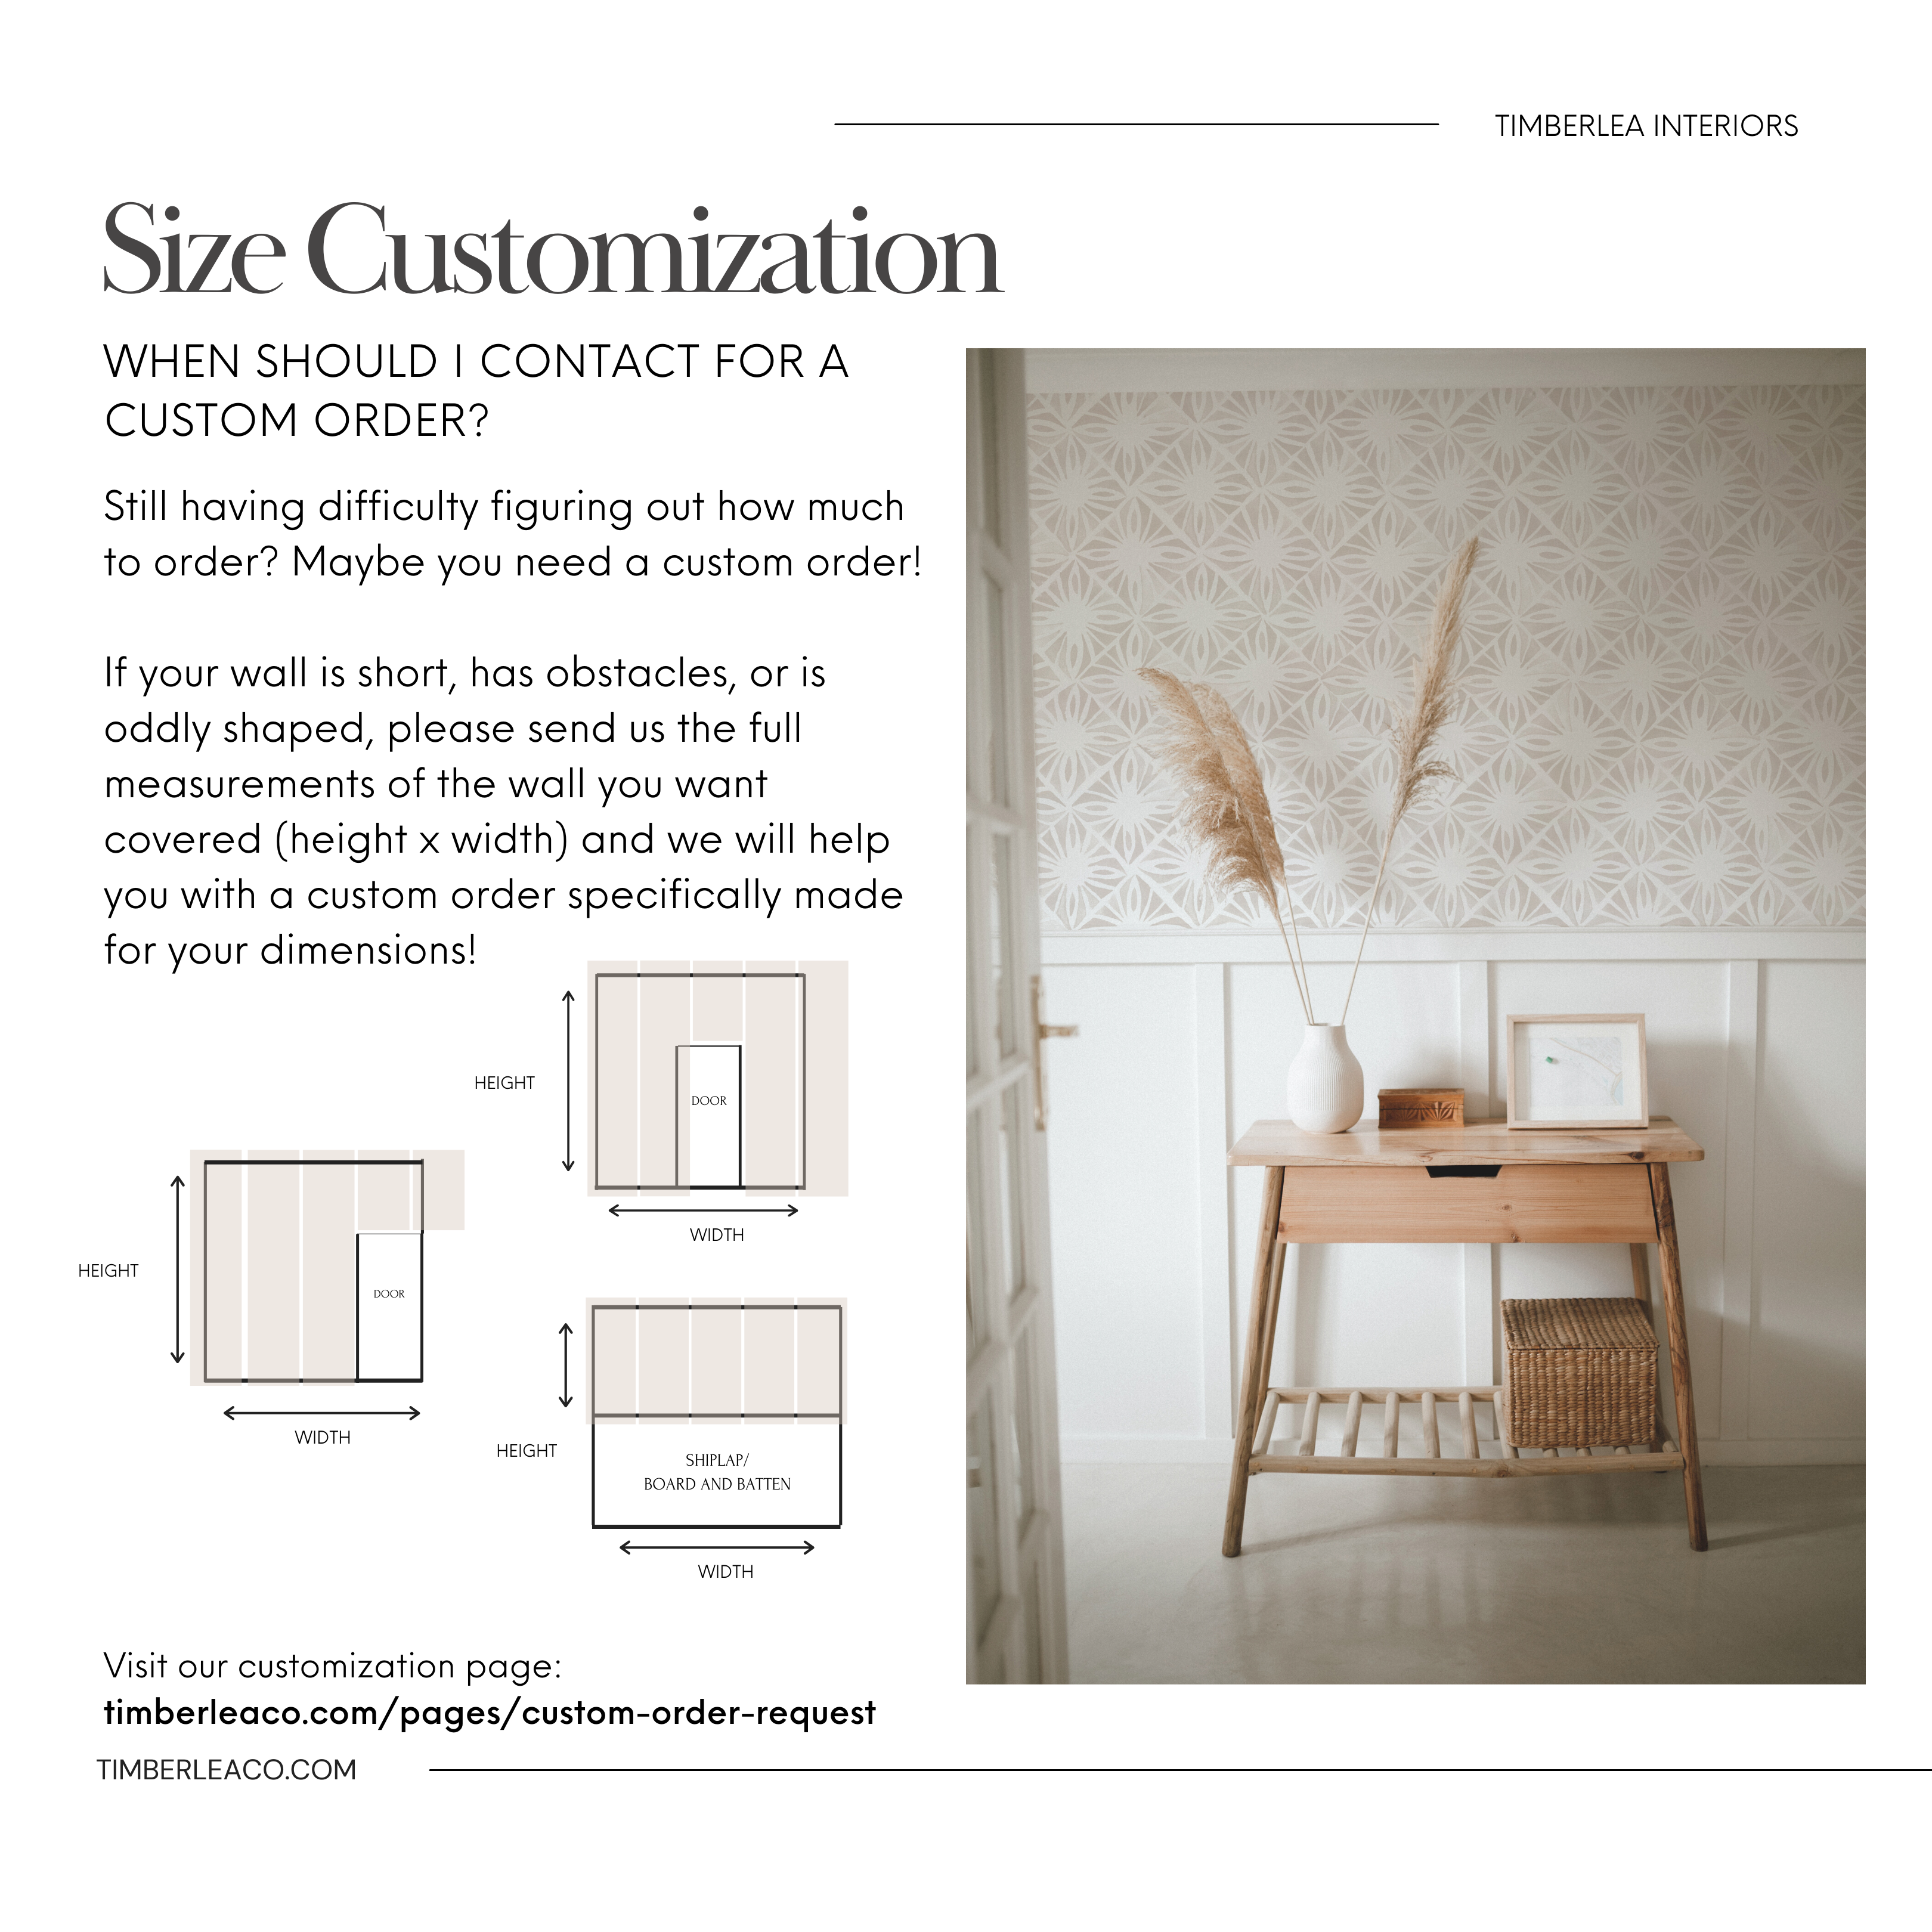 A promotional graphic by Timberlea Interiors titled 'Size Customization' advising on how to order custom-sized wallpaper. It includes an elegantly furnished space with the wallpaper, text explaining the custom order process for walls with unique dimensions, and diagrams illustrating how to measure wall space